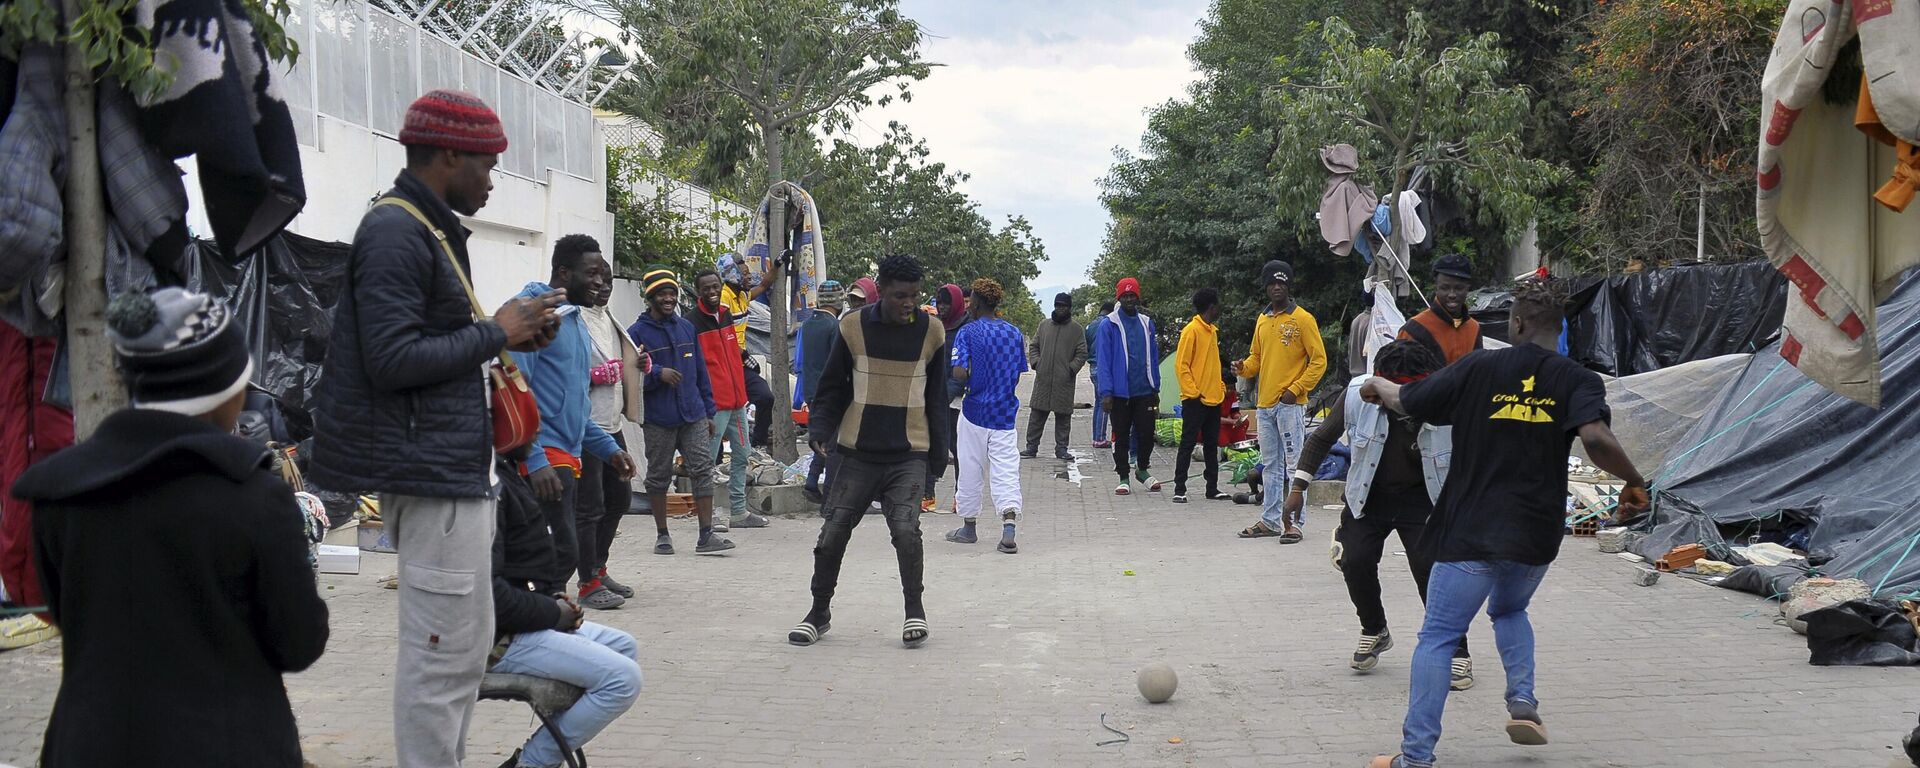 Sub-saharan migrants camp in front of the International Organization for Migration office as they seek shelter and protection amidst attacks on them, in Tunis, Tunisia, Thursday, March 2, 2023. - Sputnik International, 1920, 16.07.2023